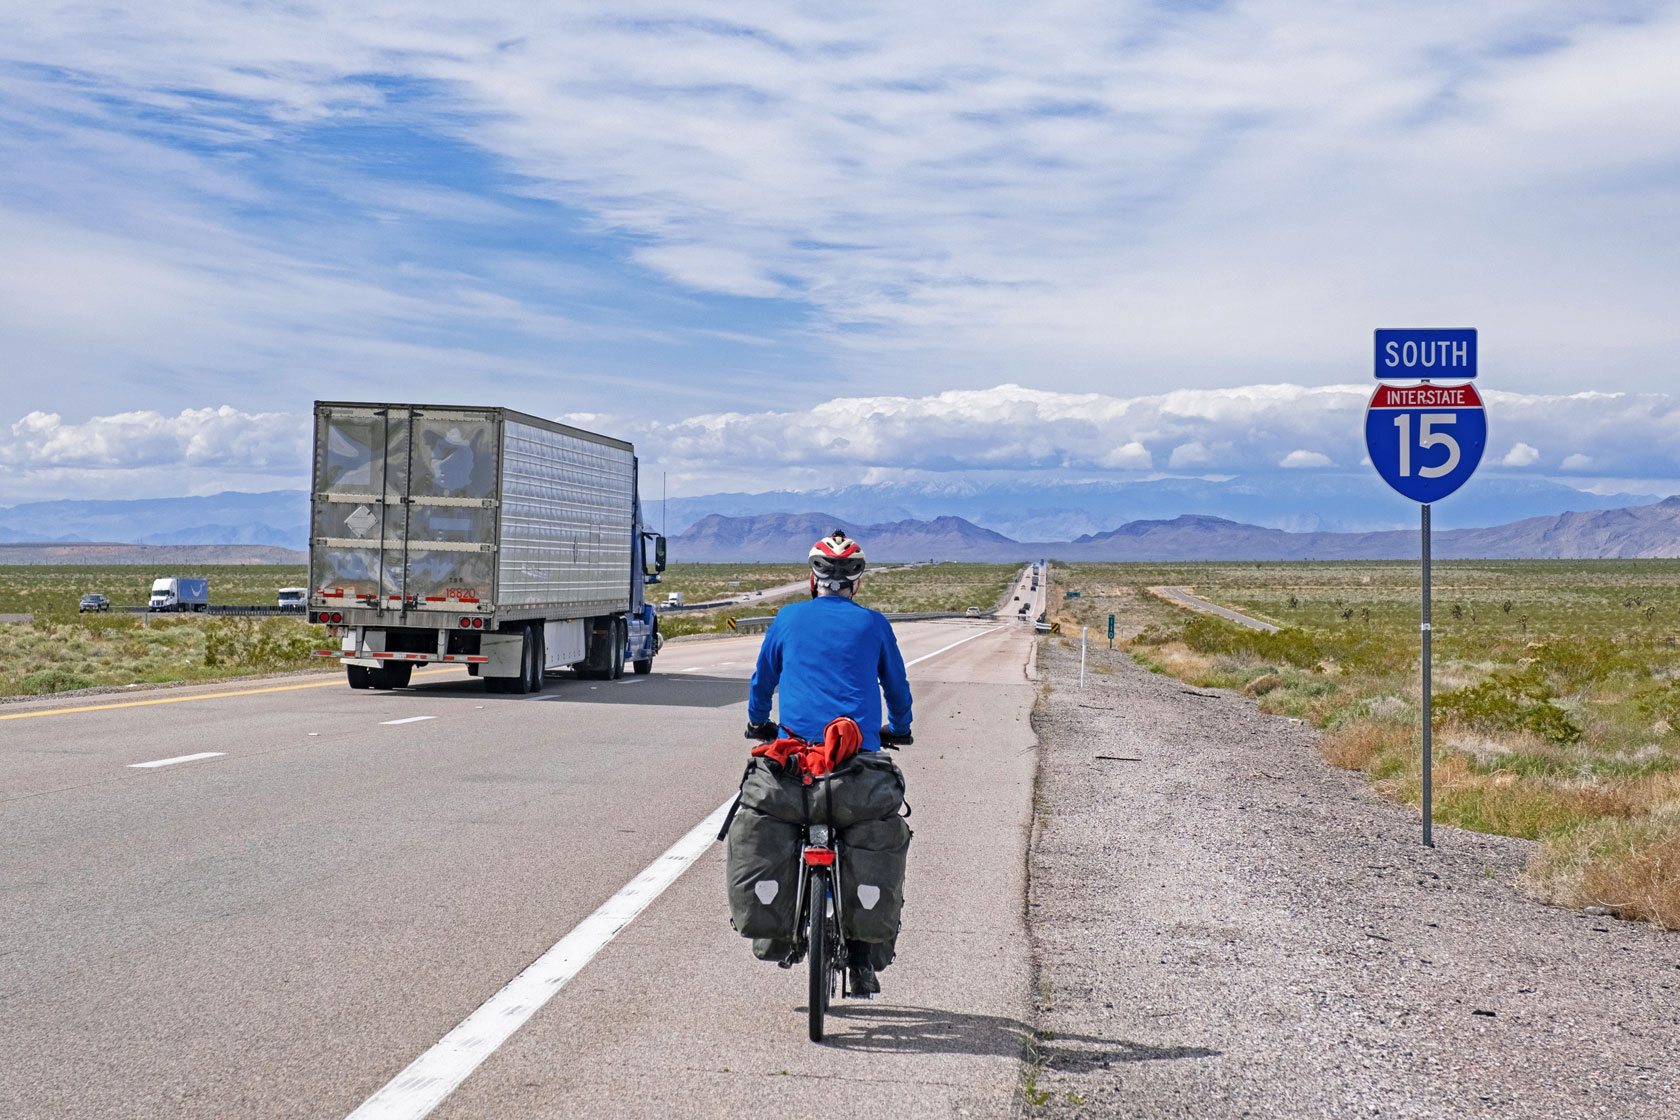 A cyclist is seen alongside a truck on a long strand of road with mountains and clouds in the background.